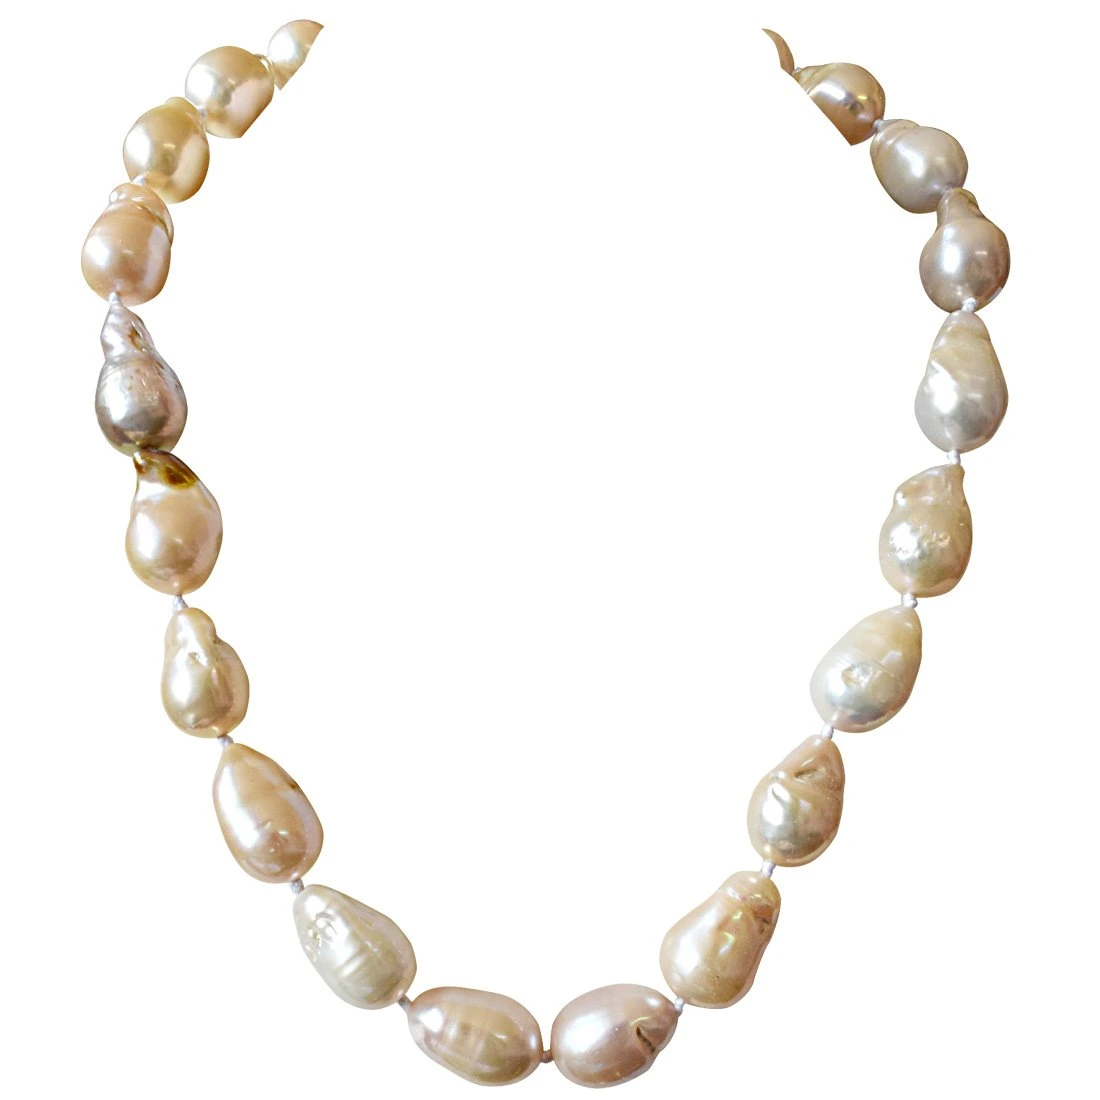 Single Line 472.55 cts Peach Real Baroque Pearl Necklace for Women (SN835-472.55cts)